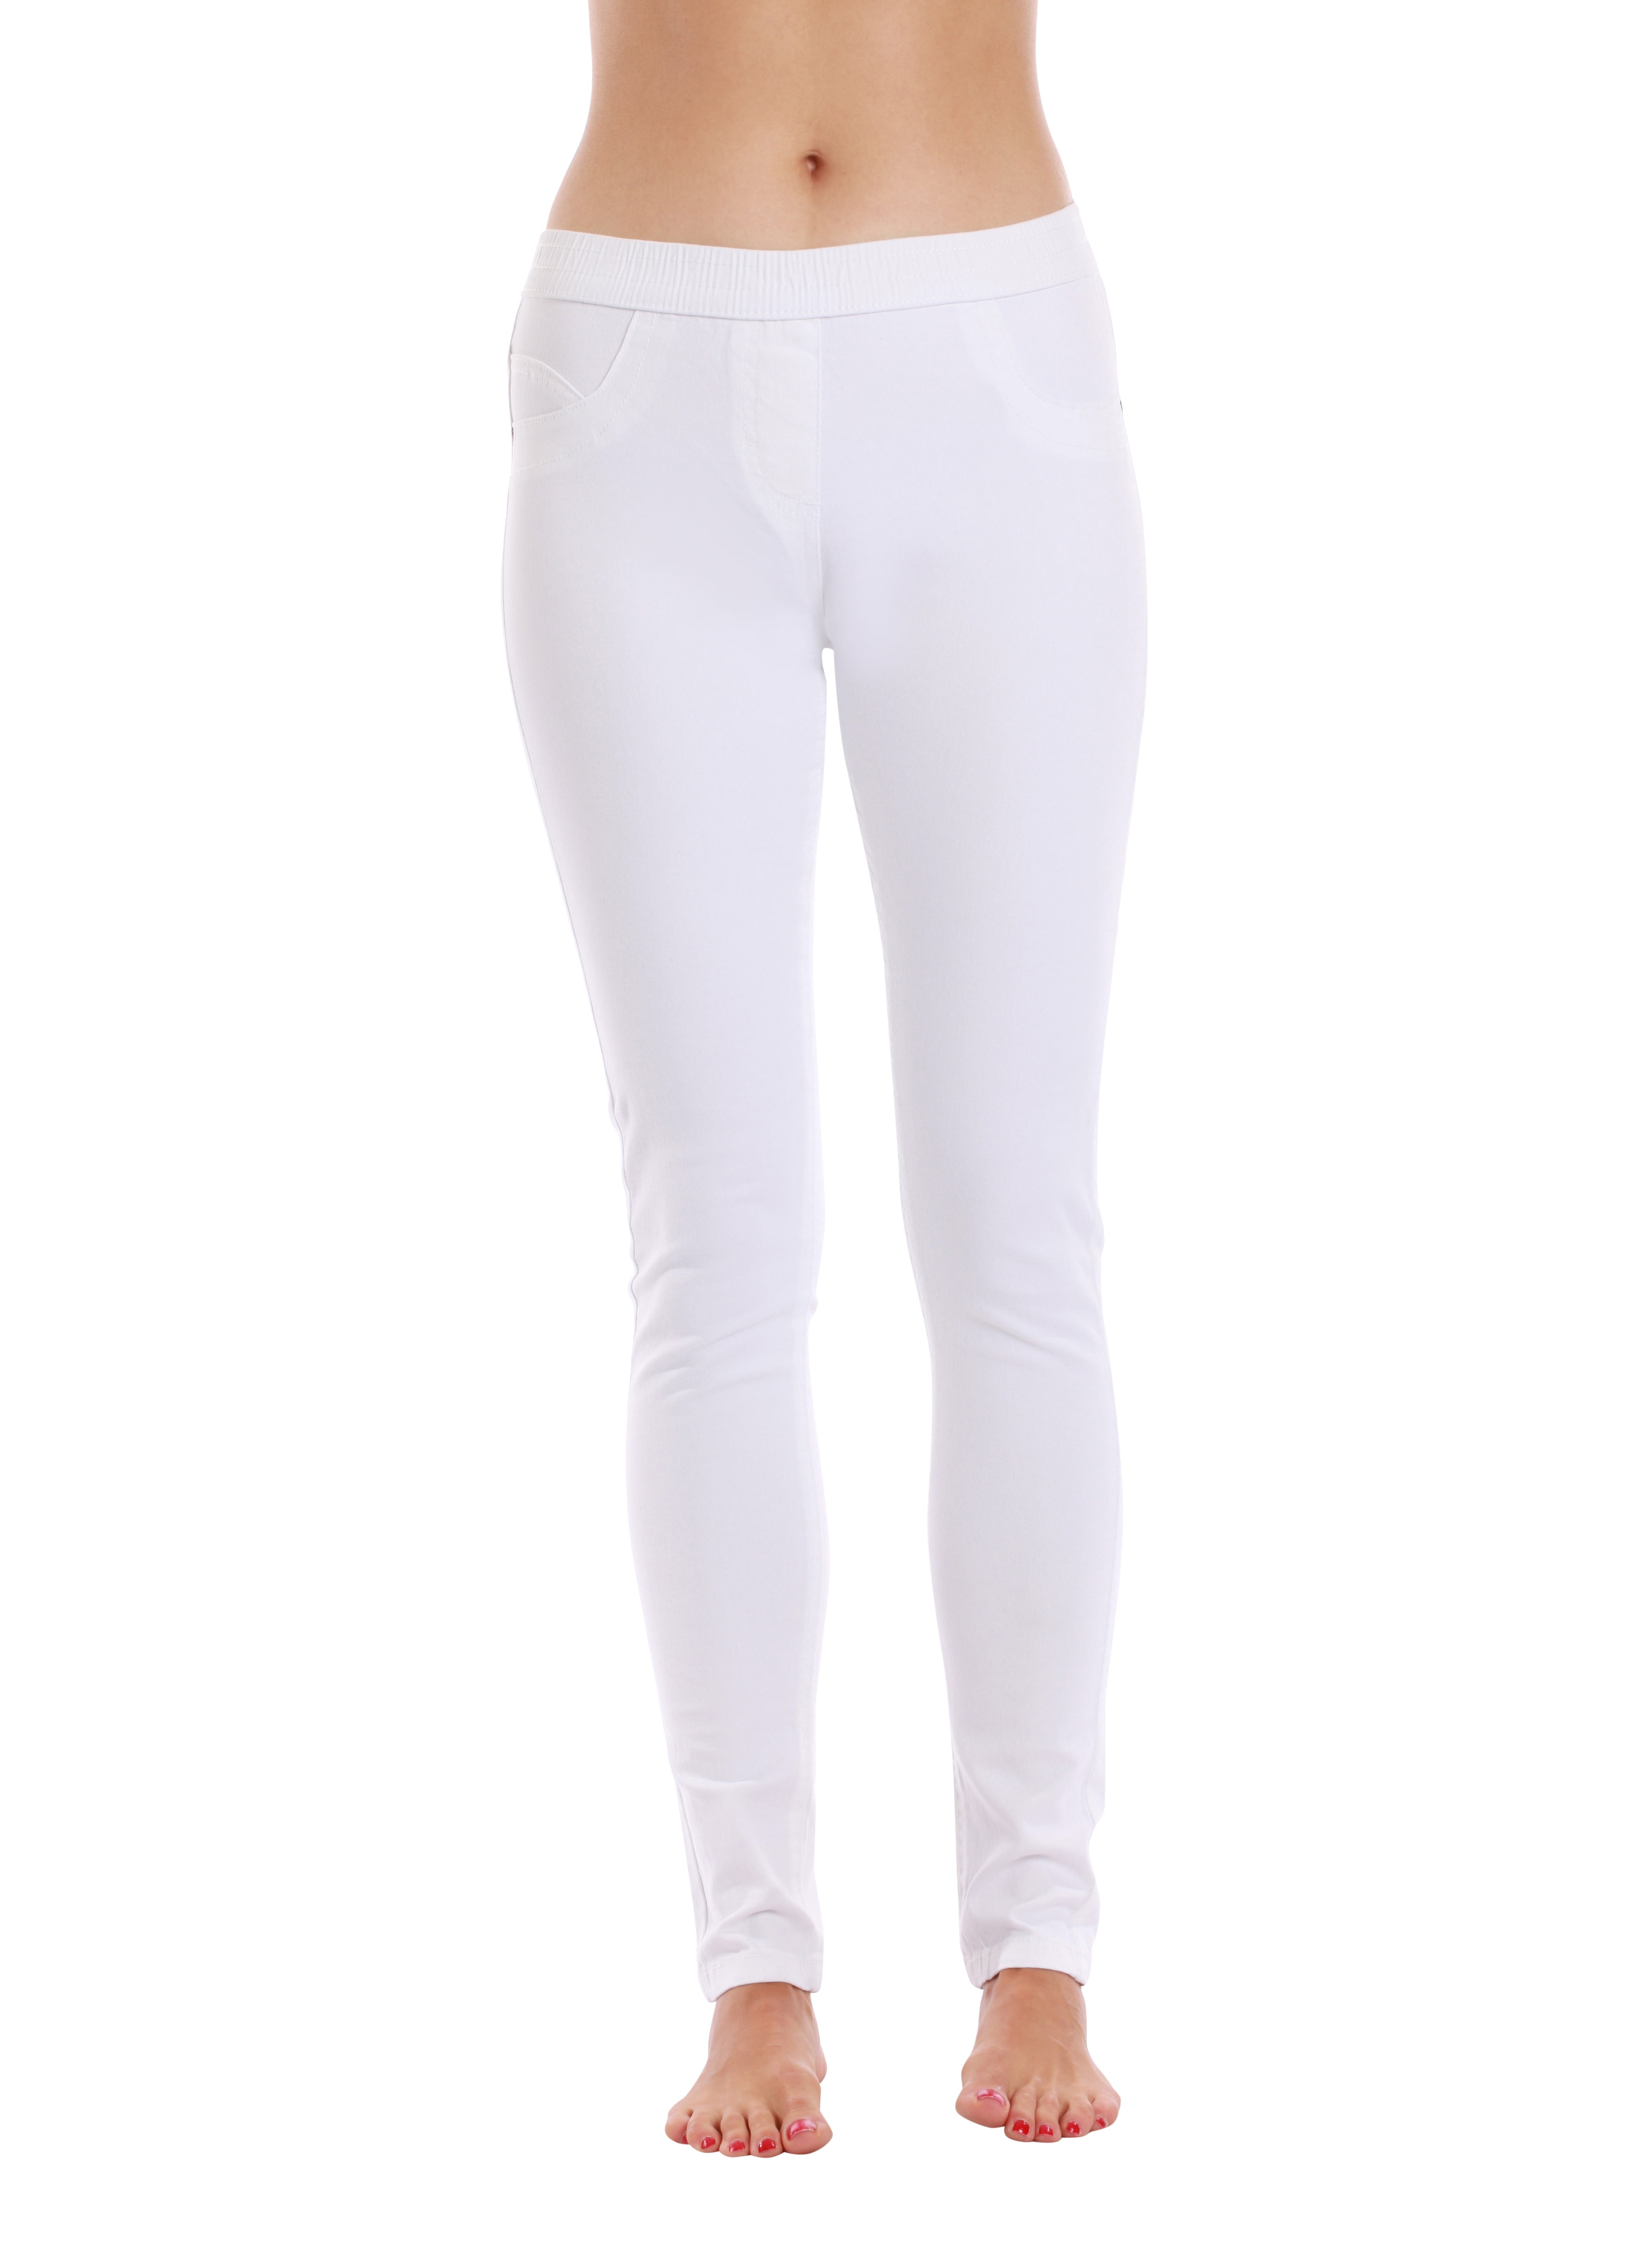 Just Love Solid Jeggings for Women (White, XXX-Large)